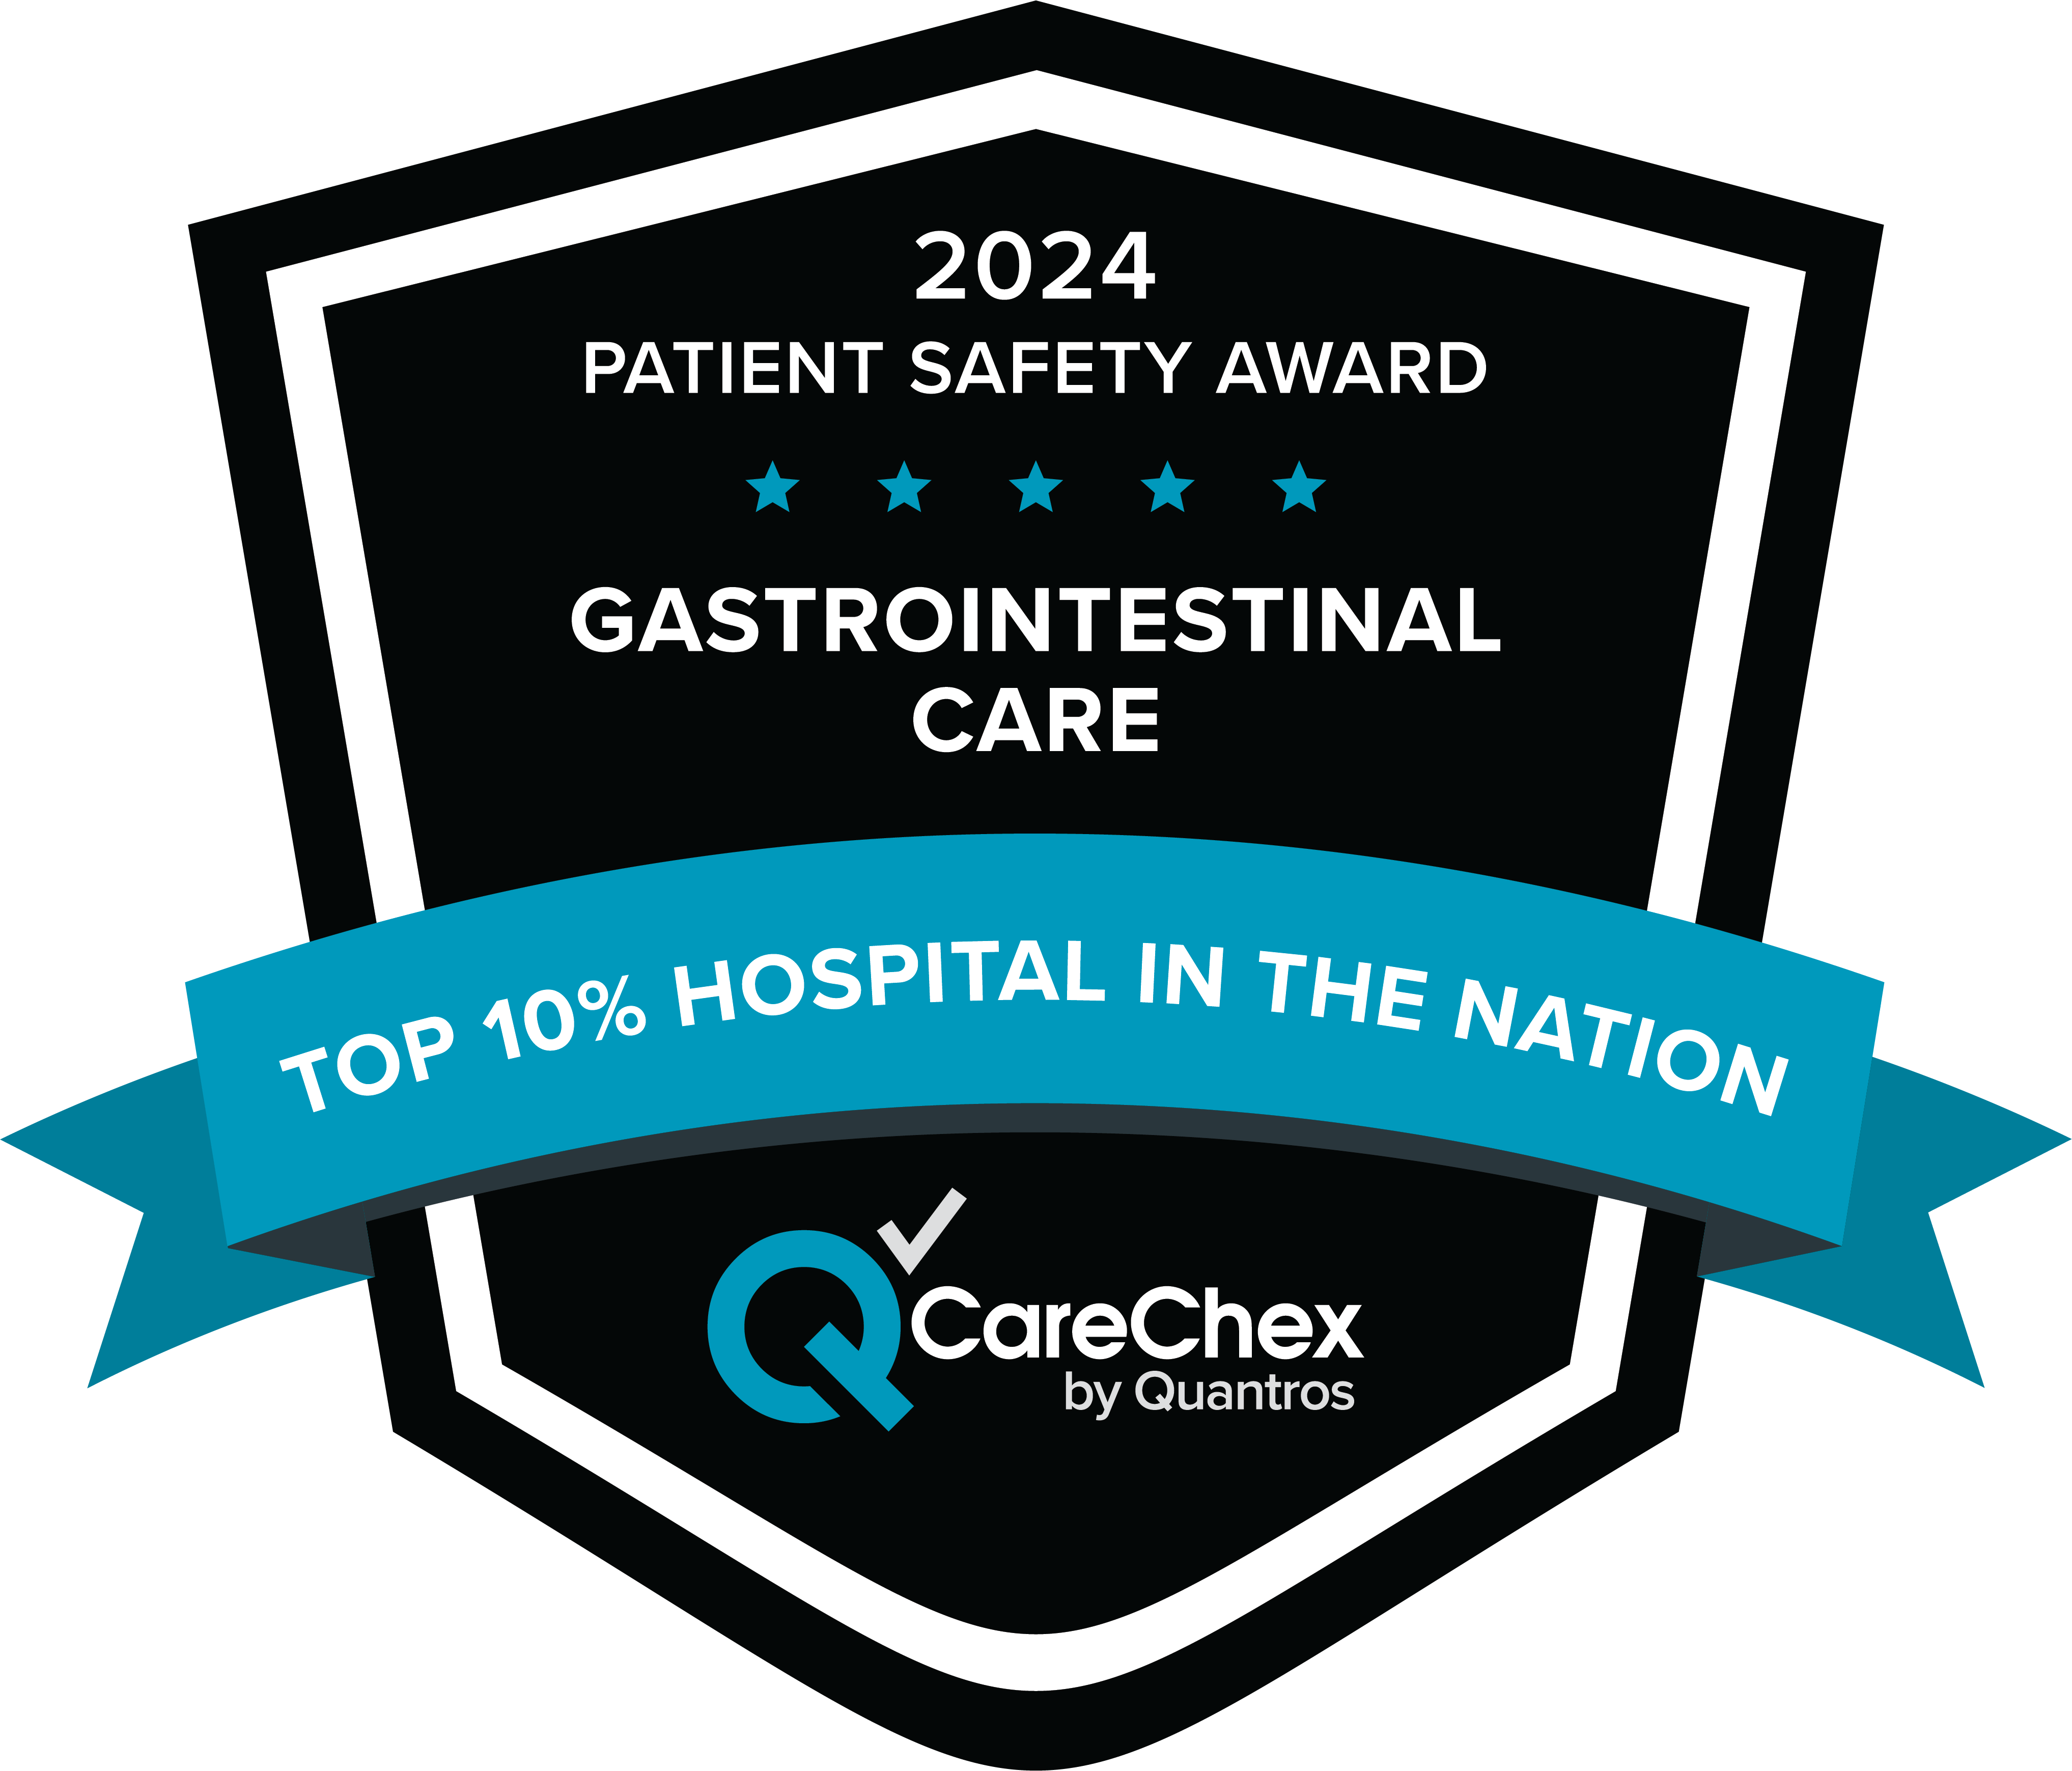 Awards badge for Top 10% Hospital in the Nation for Patient Safety in Gastrointestinal Care – 2024 CareChex by Quantros